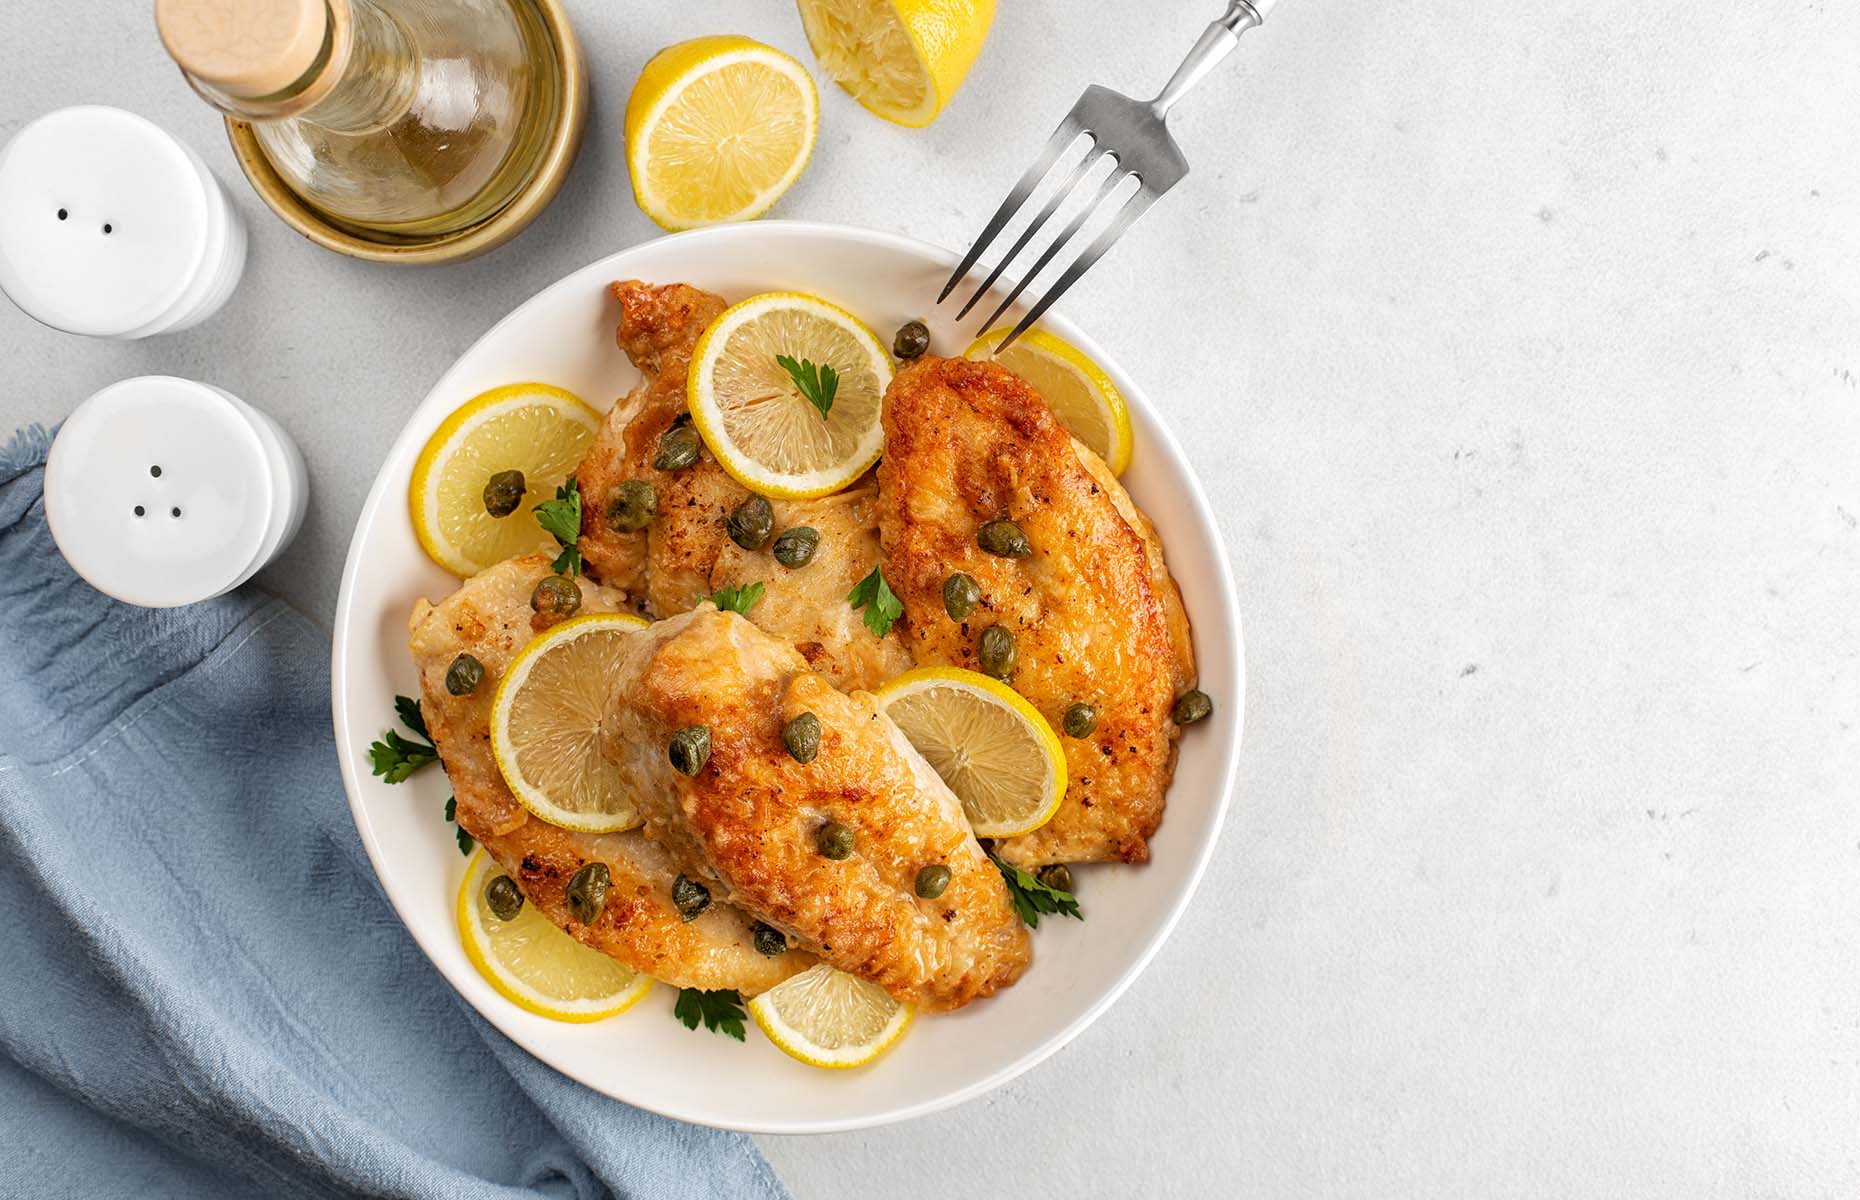 Chicken piccata with capers (Image: OlgaBombologna/Shutterstock)